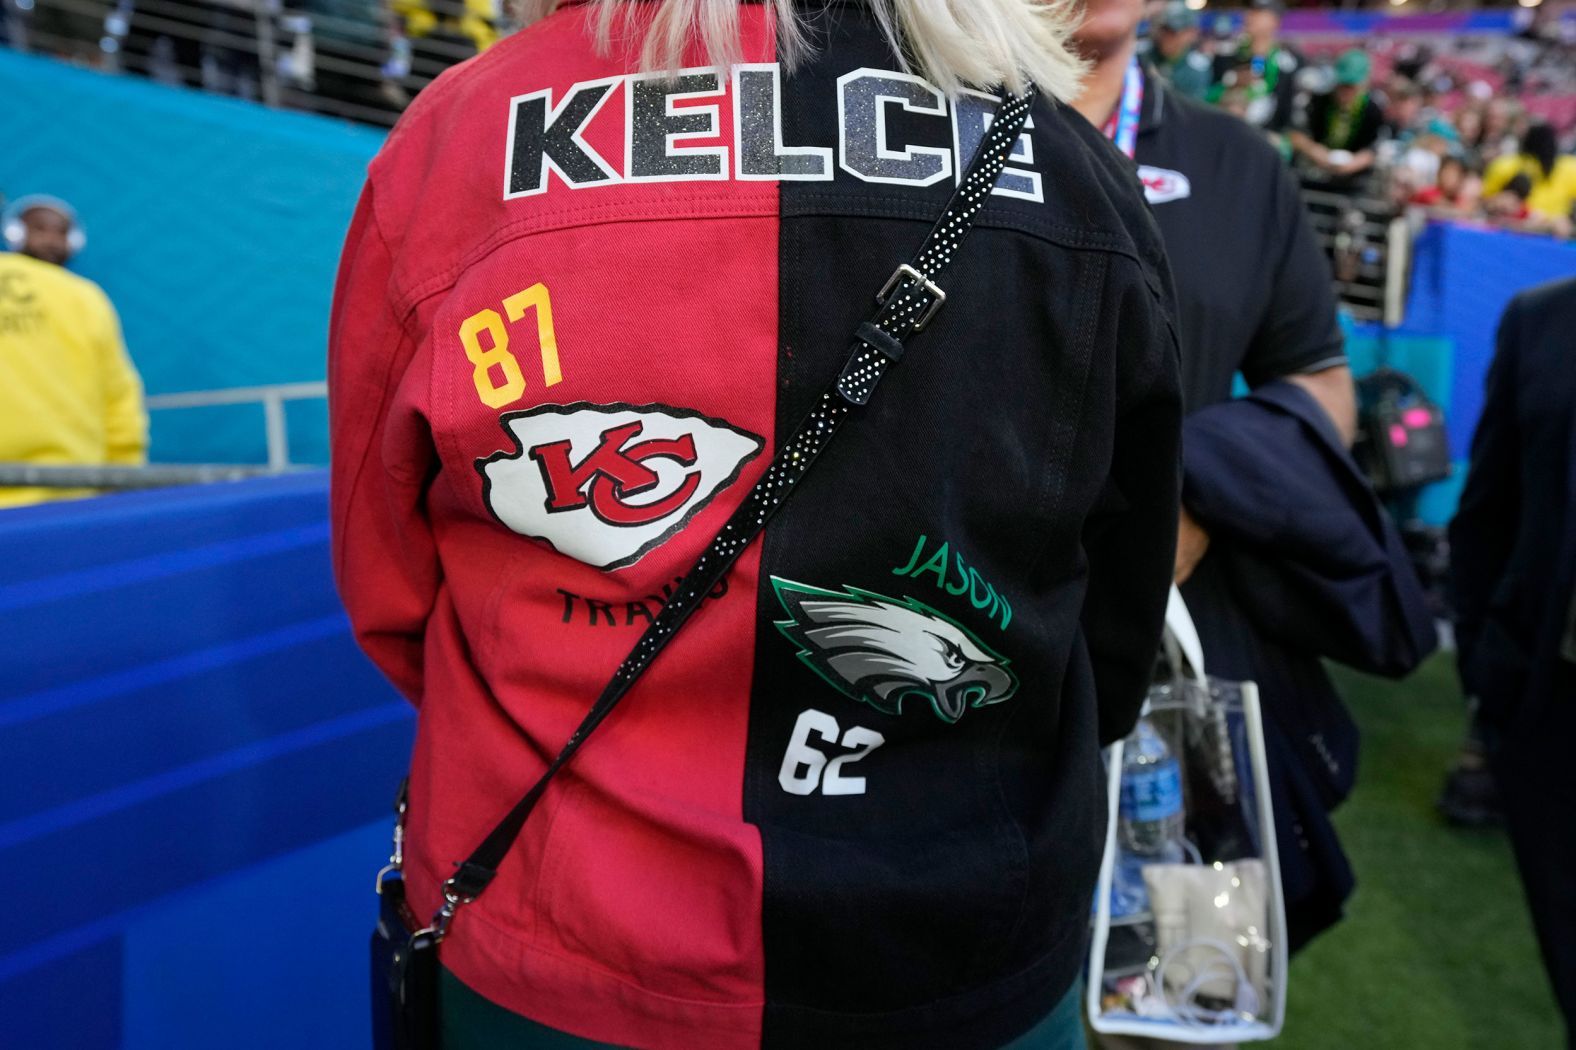 Donna Kelce, the mother of Travis and Jason Kelce, wears a jacket showing support for both of her sons' teams.